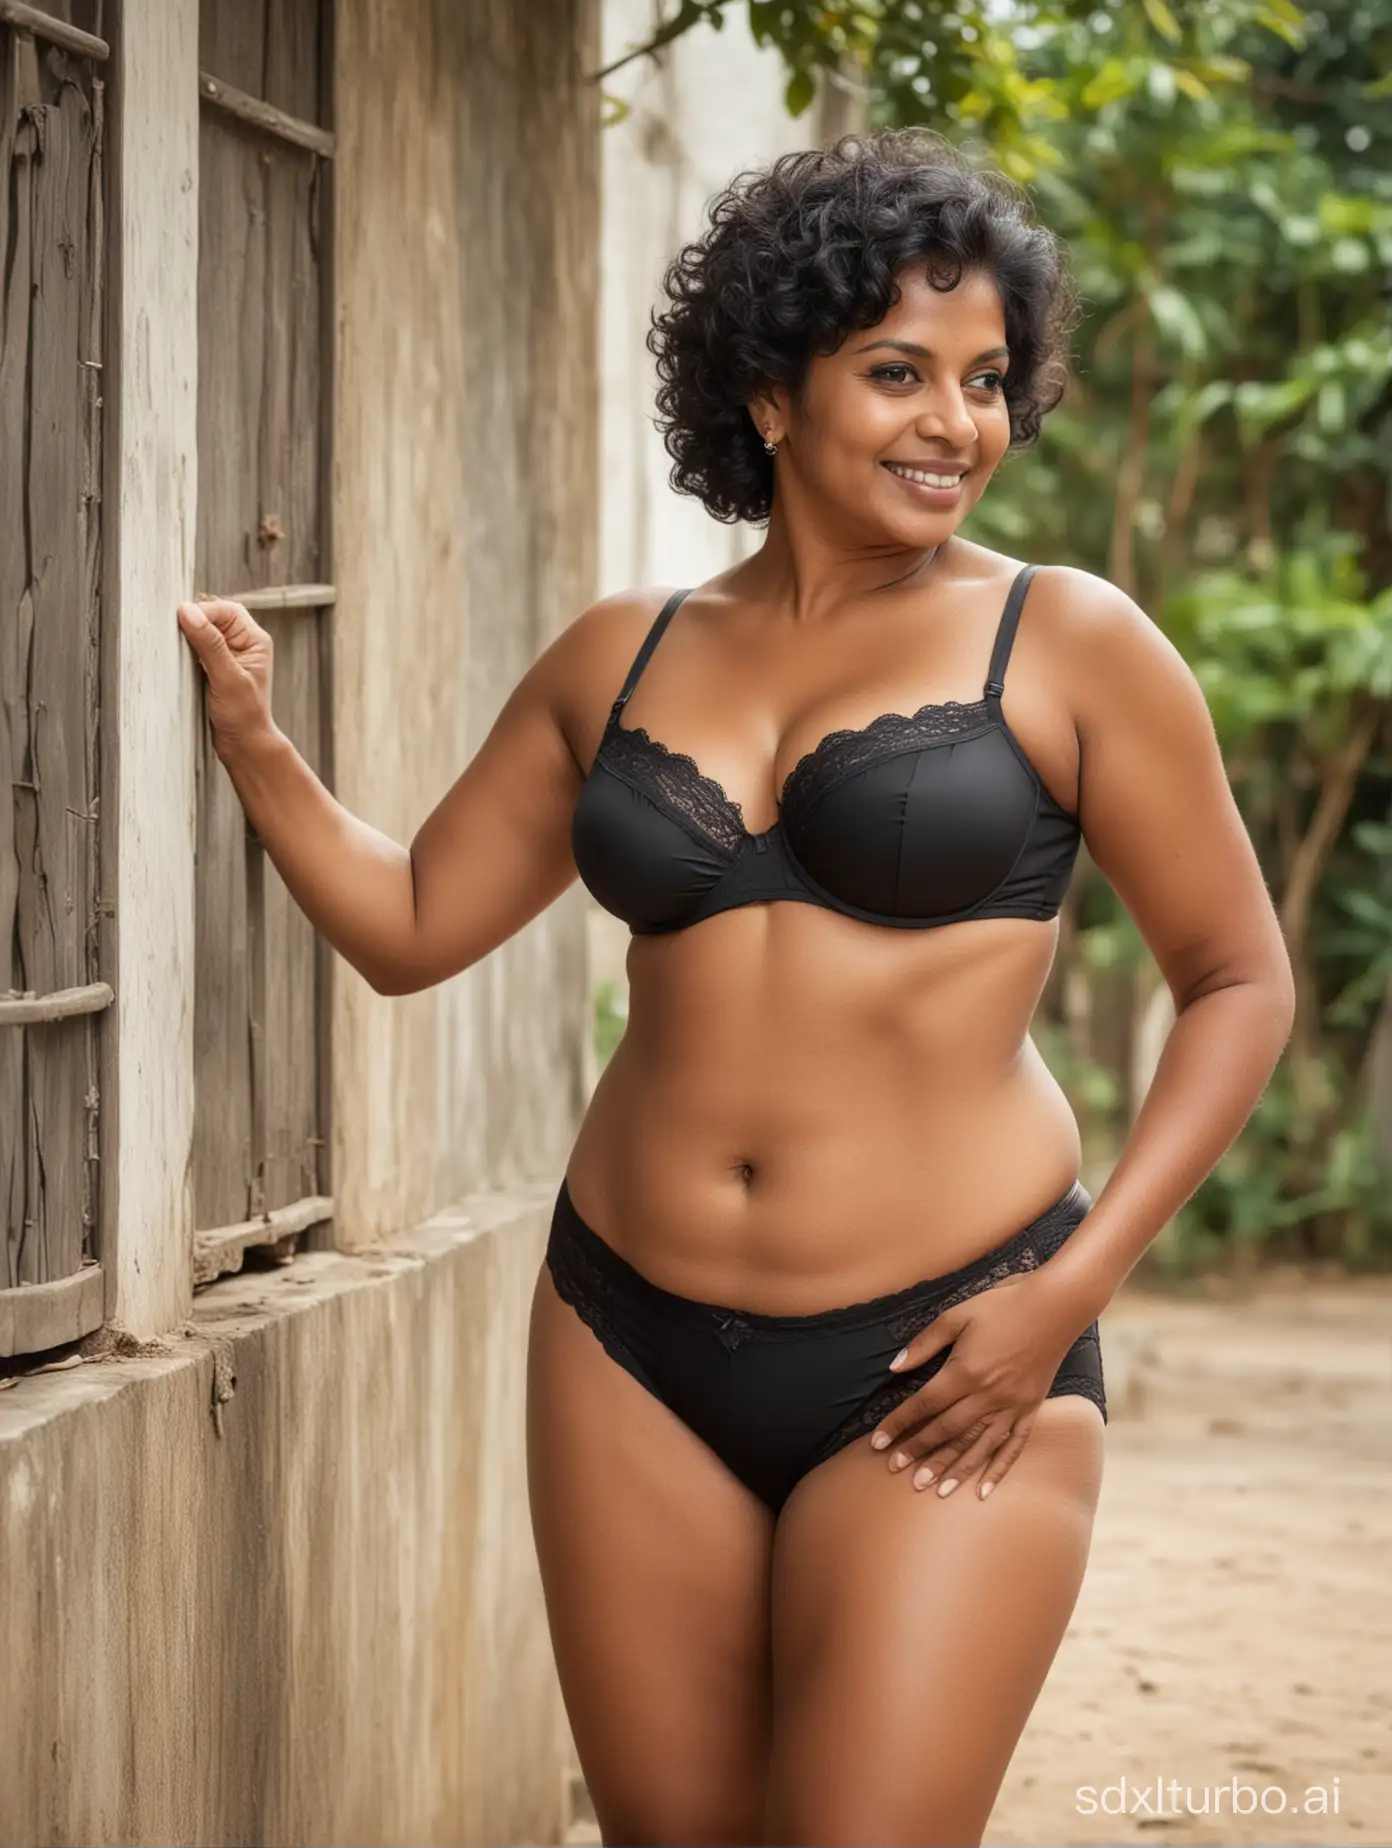 side view full body photo of a beautiful sri lankan woman, 60 years old, in a bra and panty, fat thights, short legs, happy, curly black hair, outdoor photo-shoot, high detailed, instagram style